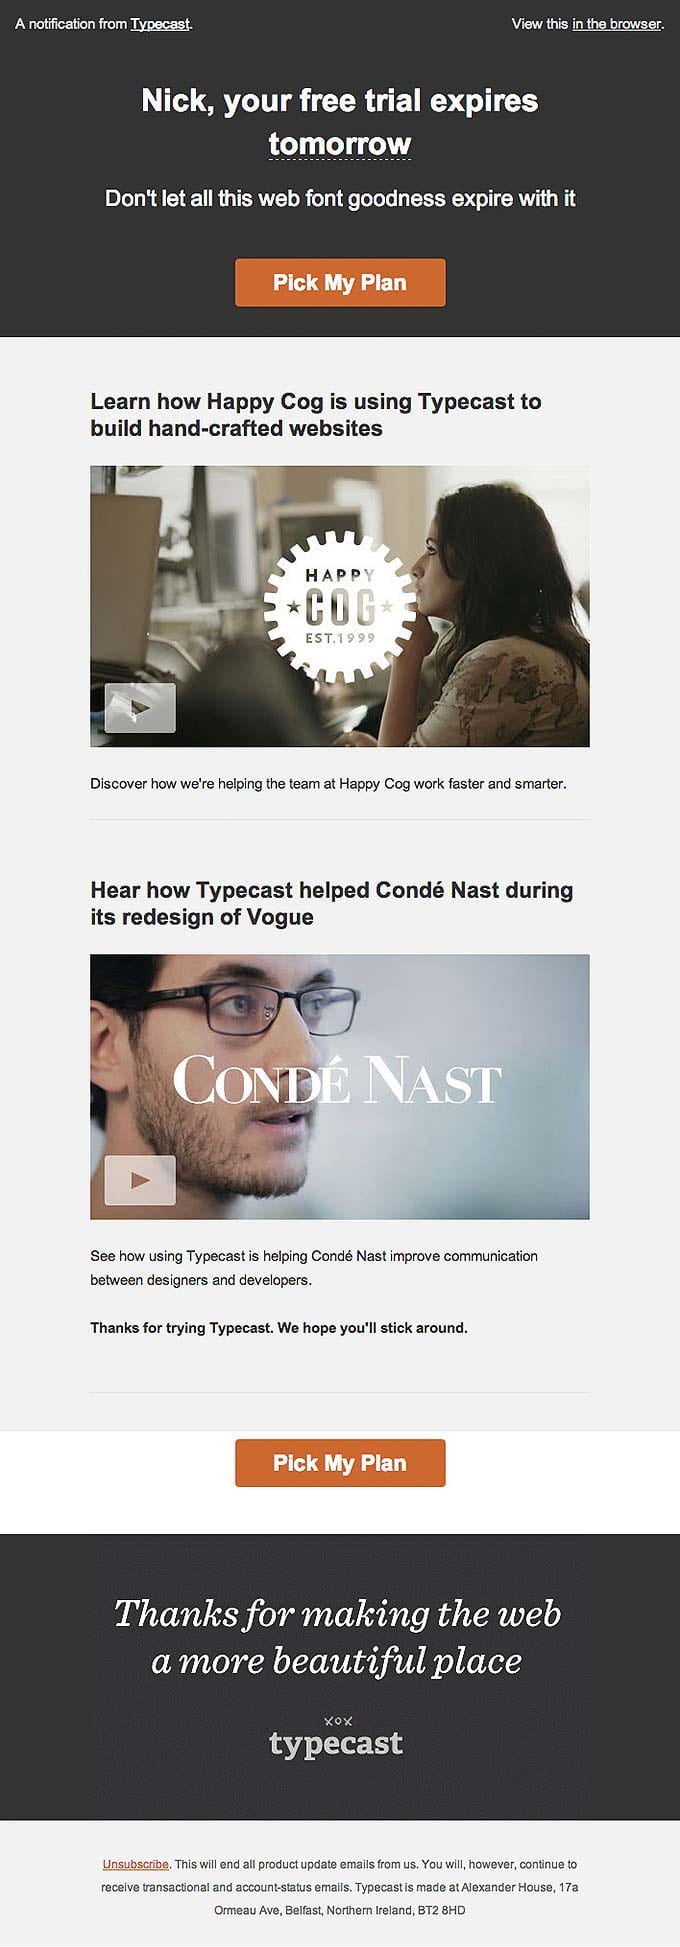 Onboarding Emails - Free Trial Ending Email - Typecast